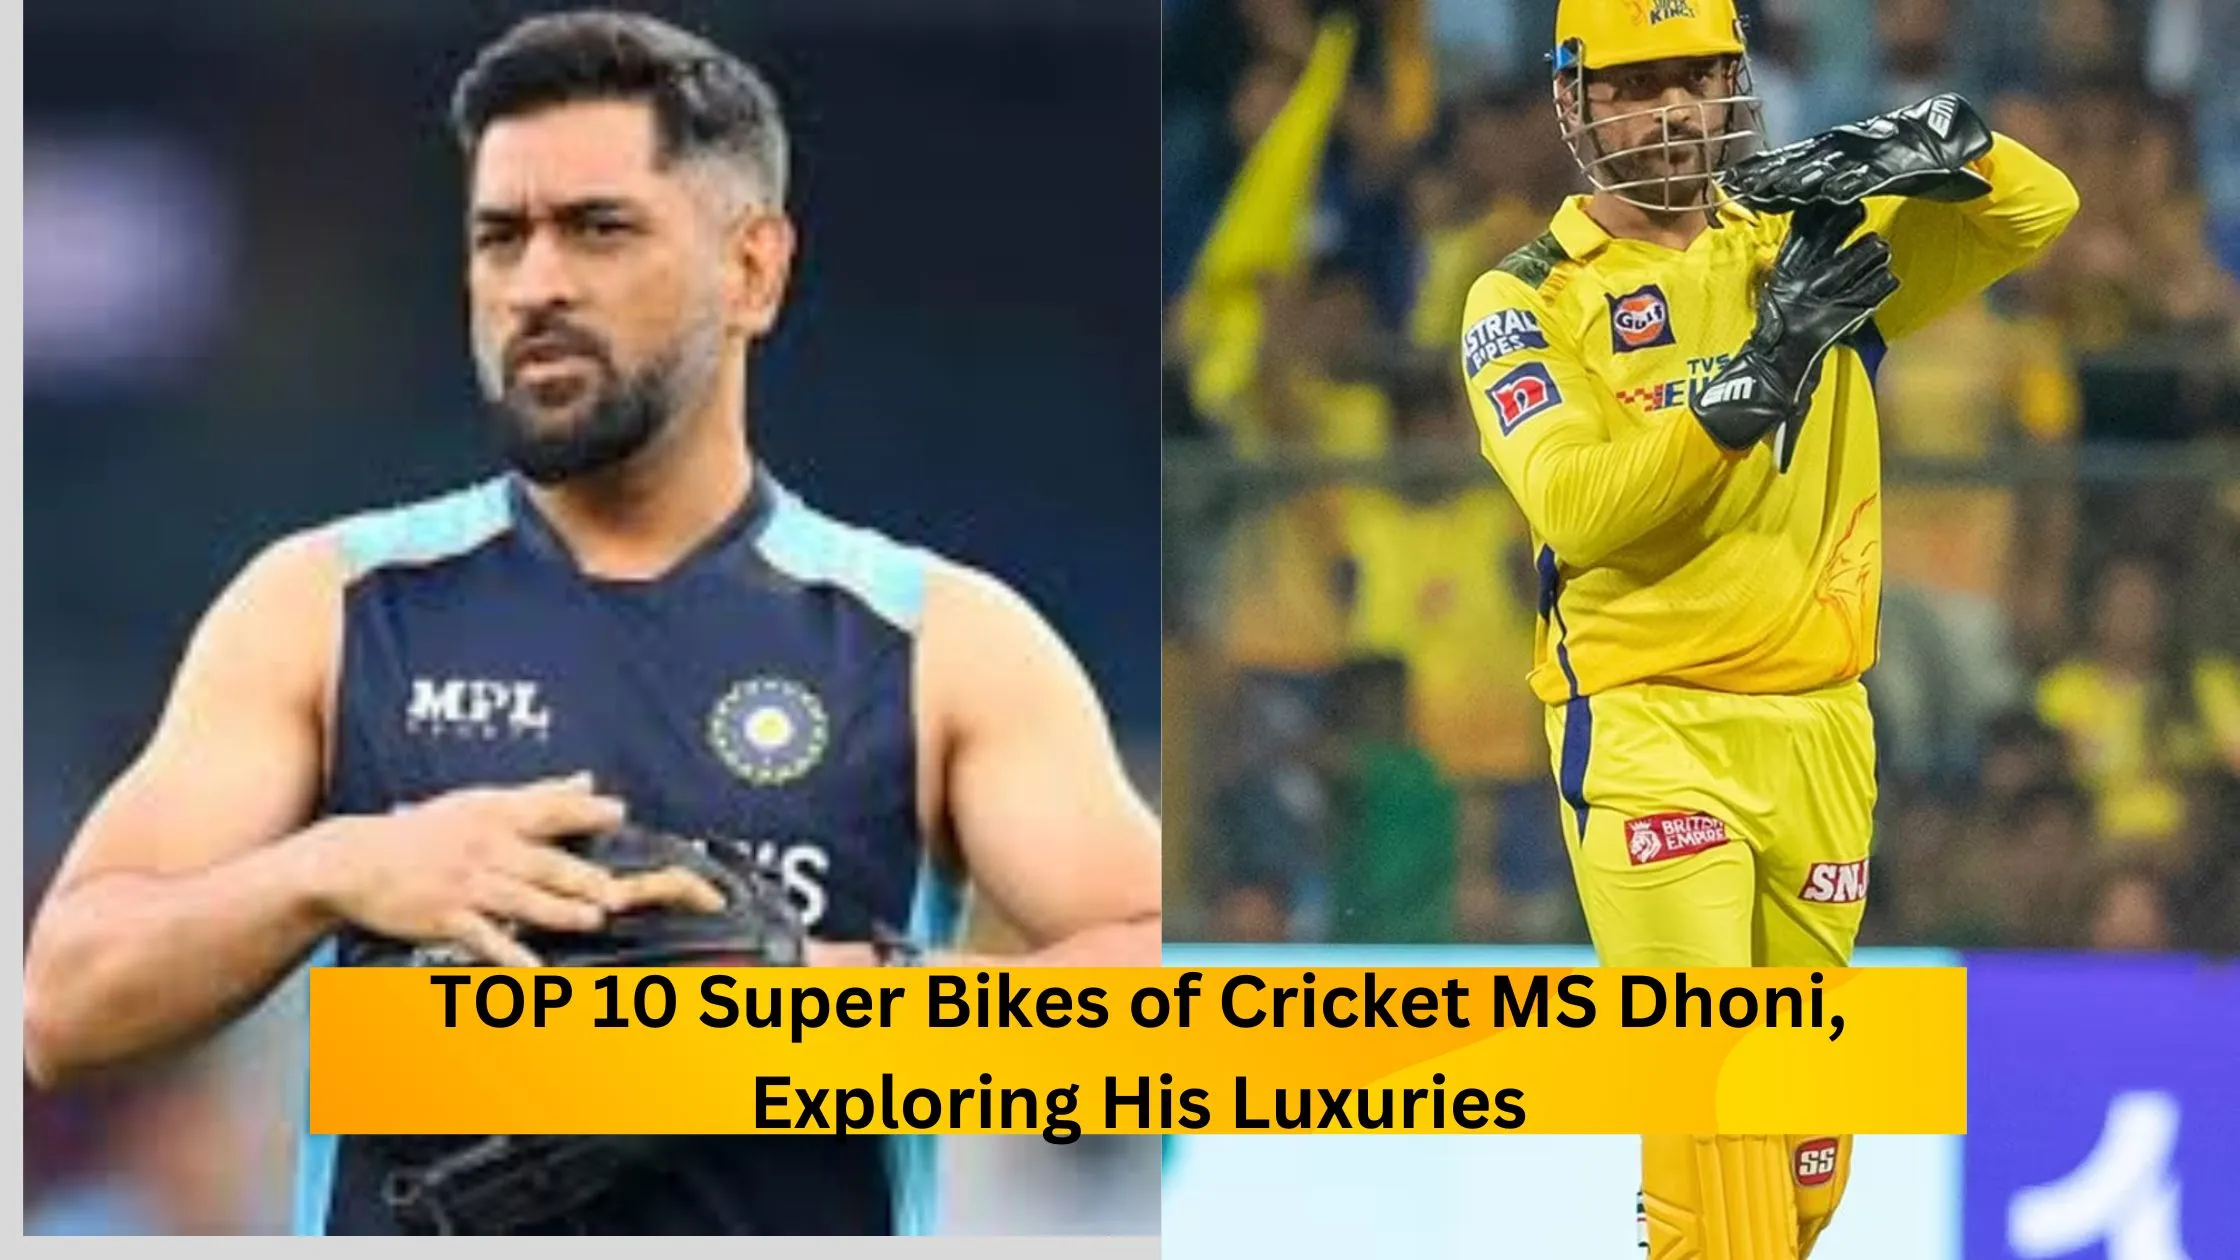 TOP 10 Super Bikes of Cricket MS Dhoni, Exploring His Luxuries